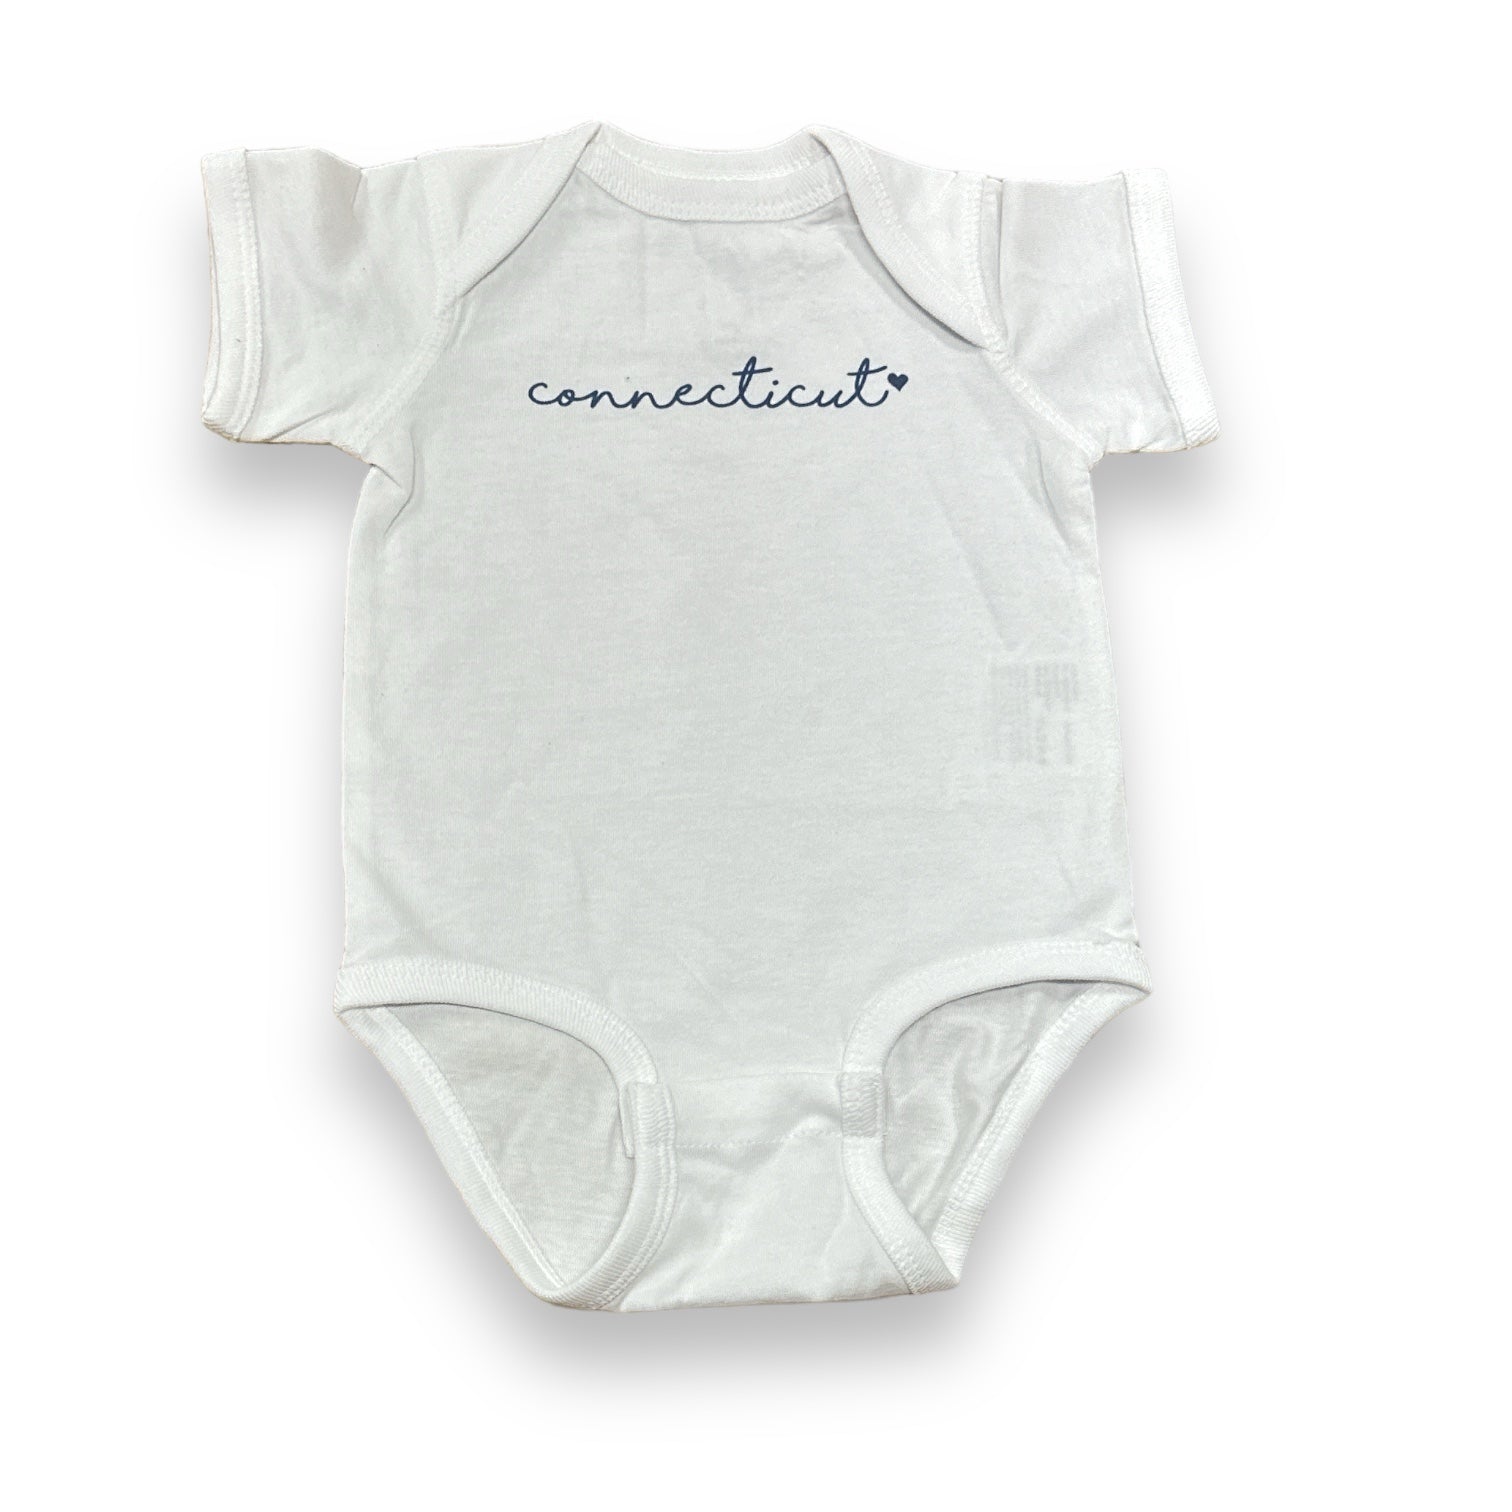 Connecticut Infant Body Suit - White with Navy Print - 6M - Mellow Monkey